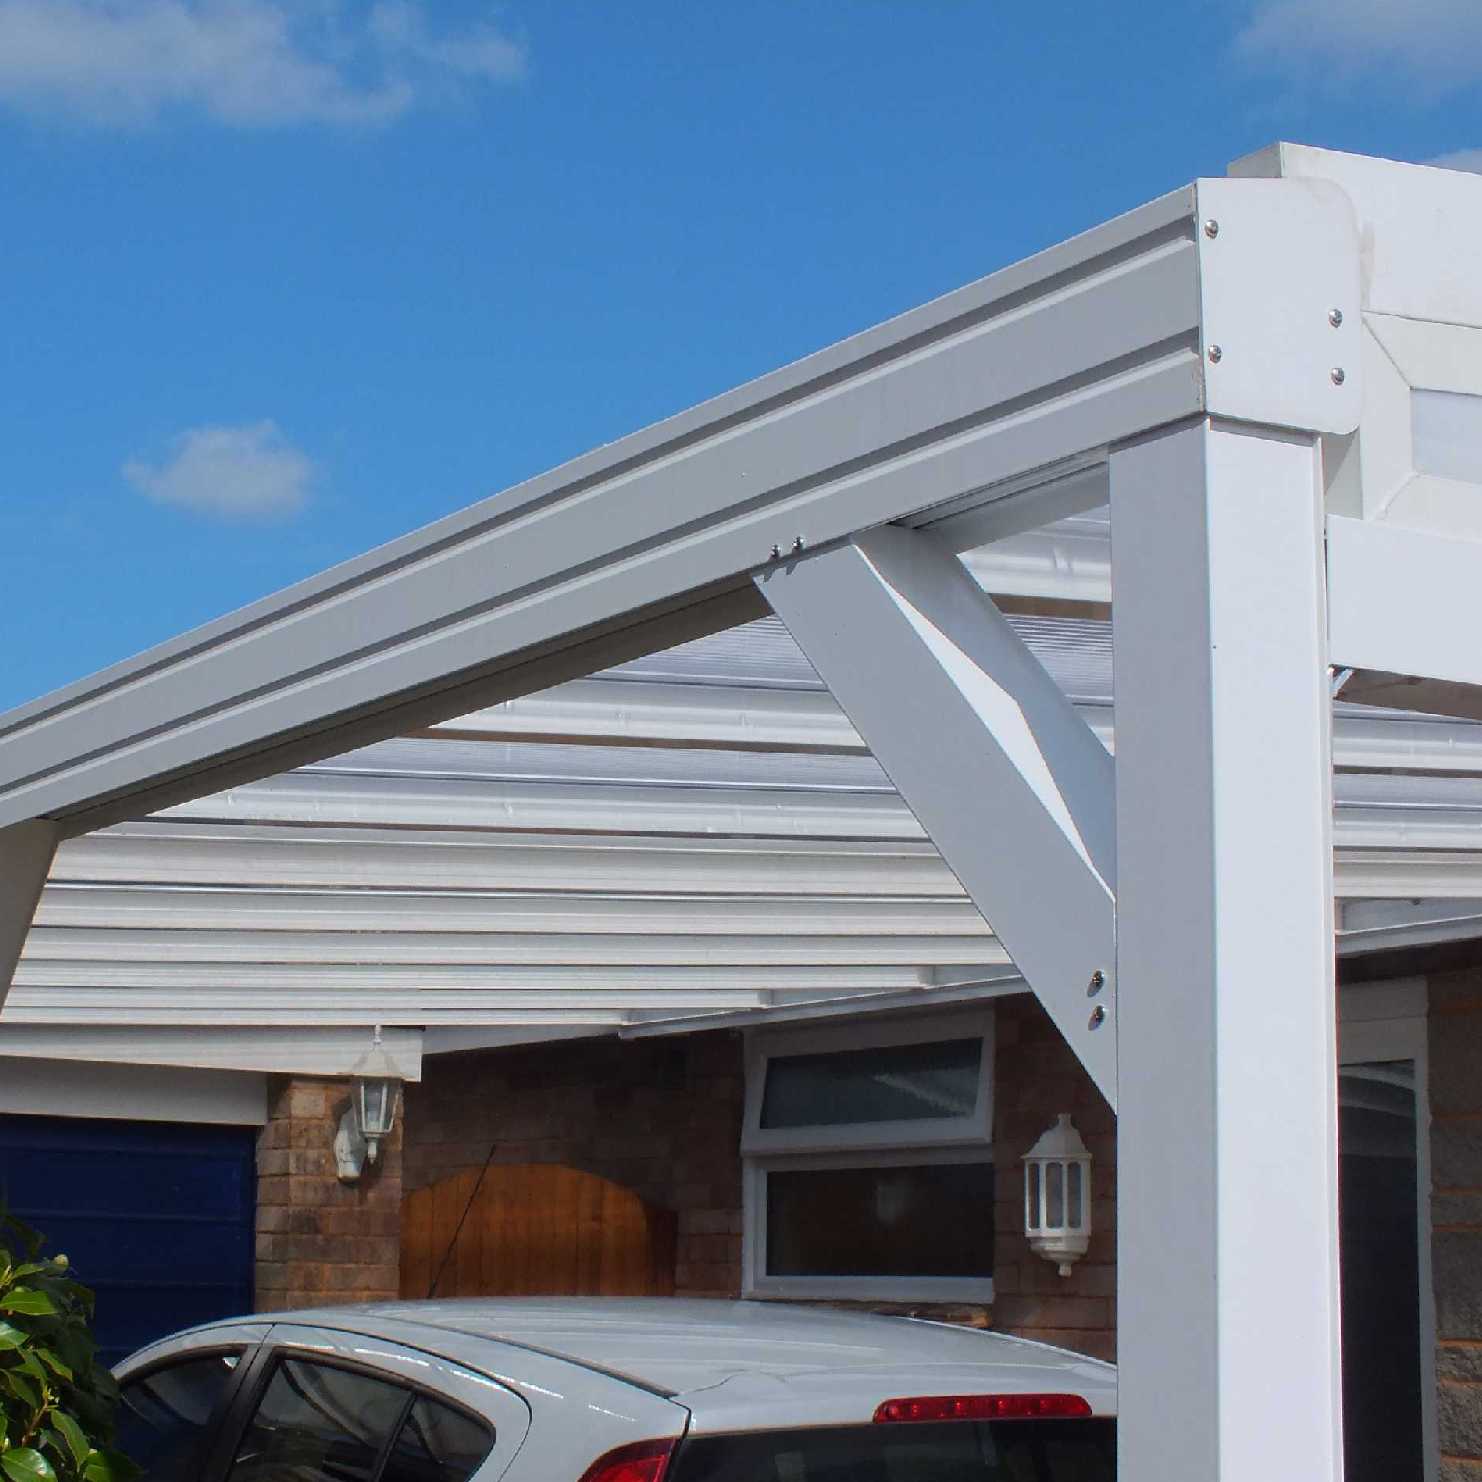 Great deals on Omega Smart Lean-To Canopy, White with 16mm Polycarbonate Glazing - 10.6m (W) x 1.5m (P), (5) Supporting Posts